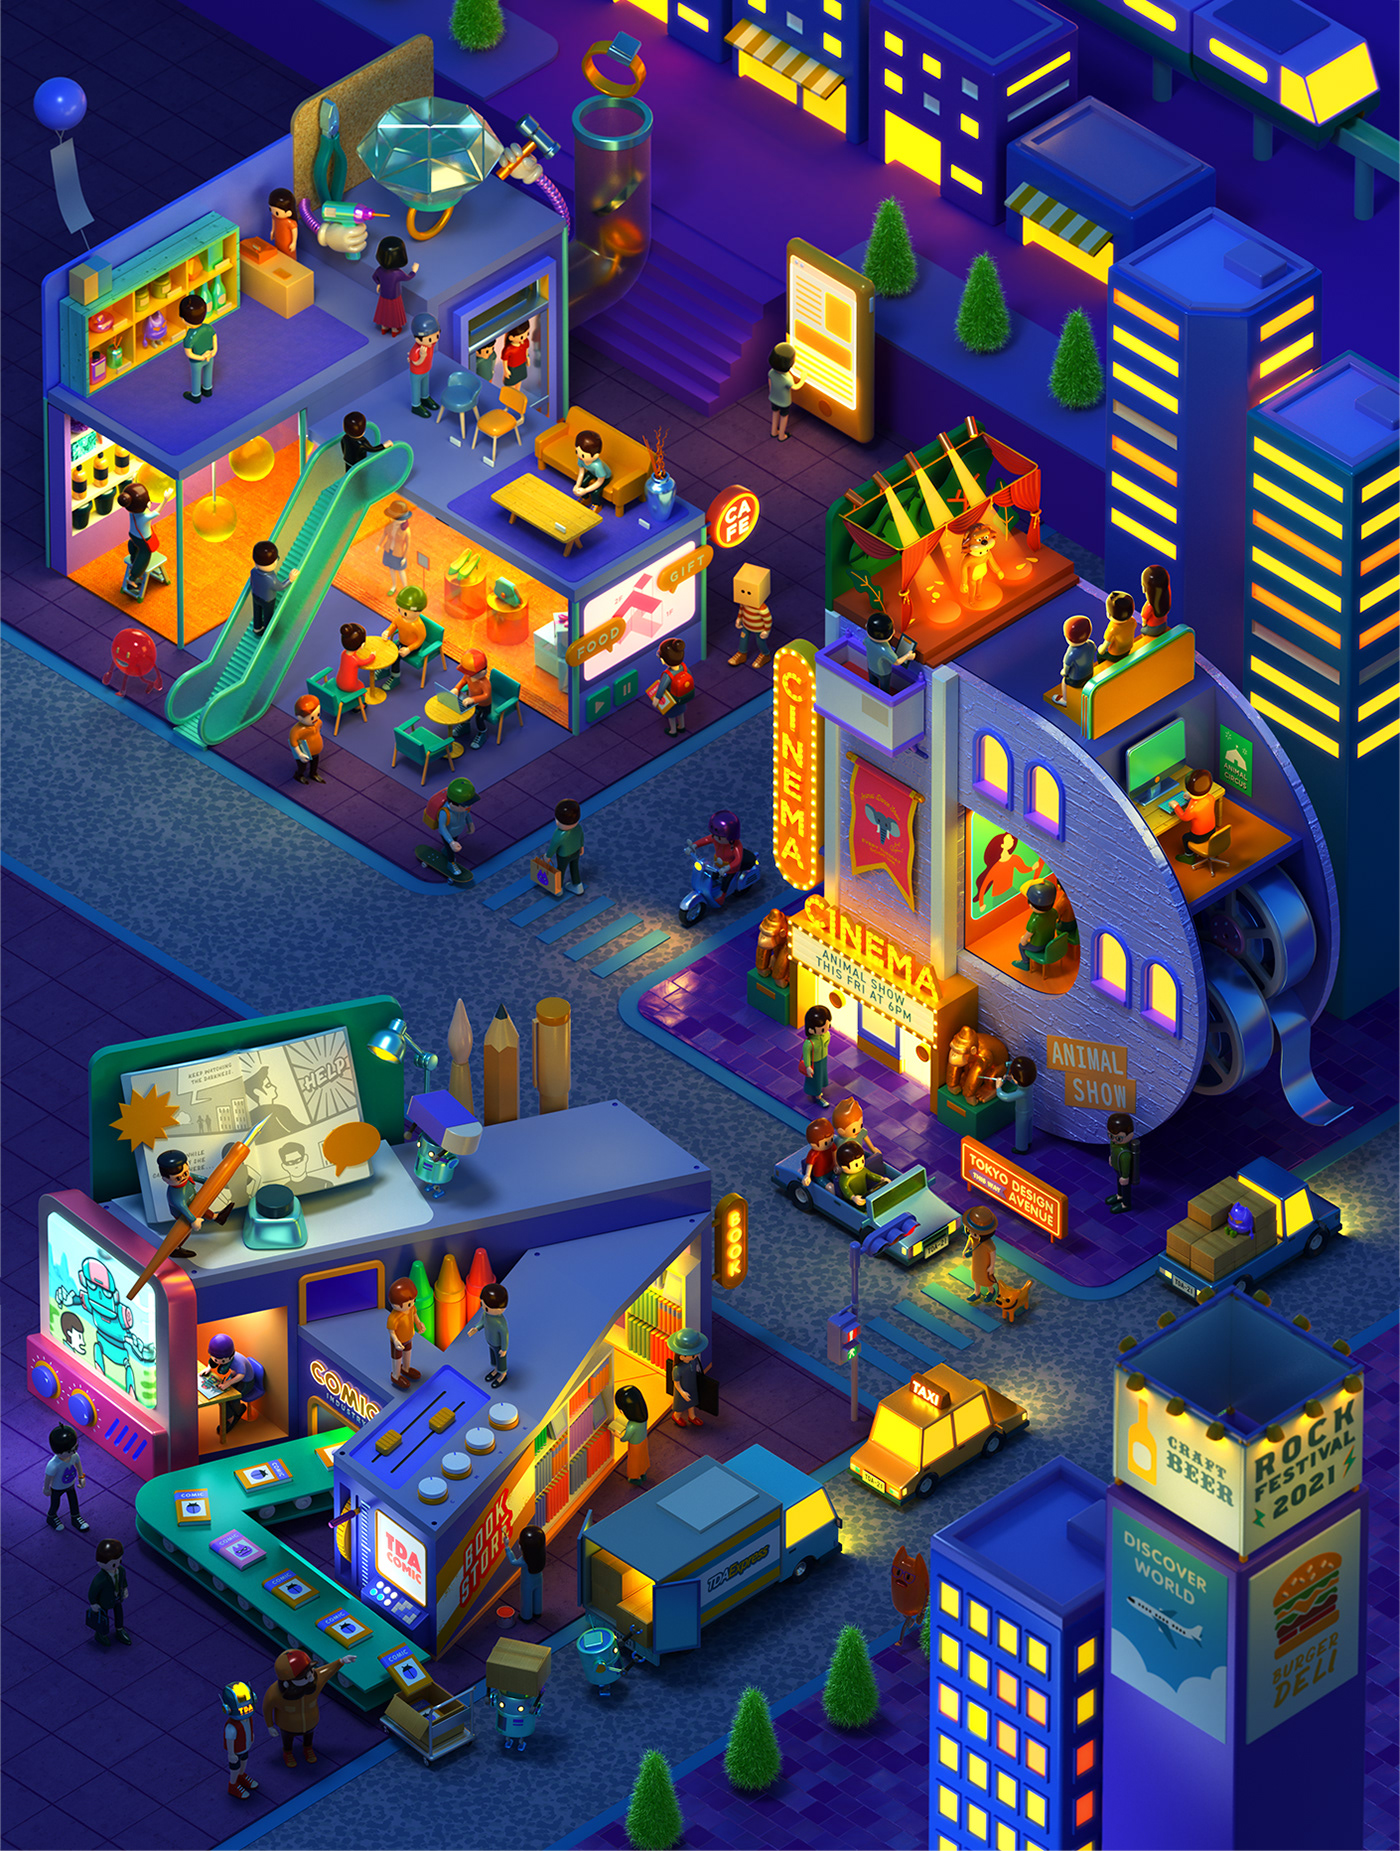 Colorful 3D Illustrations for Tokyo Design Academy School